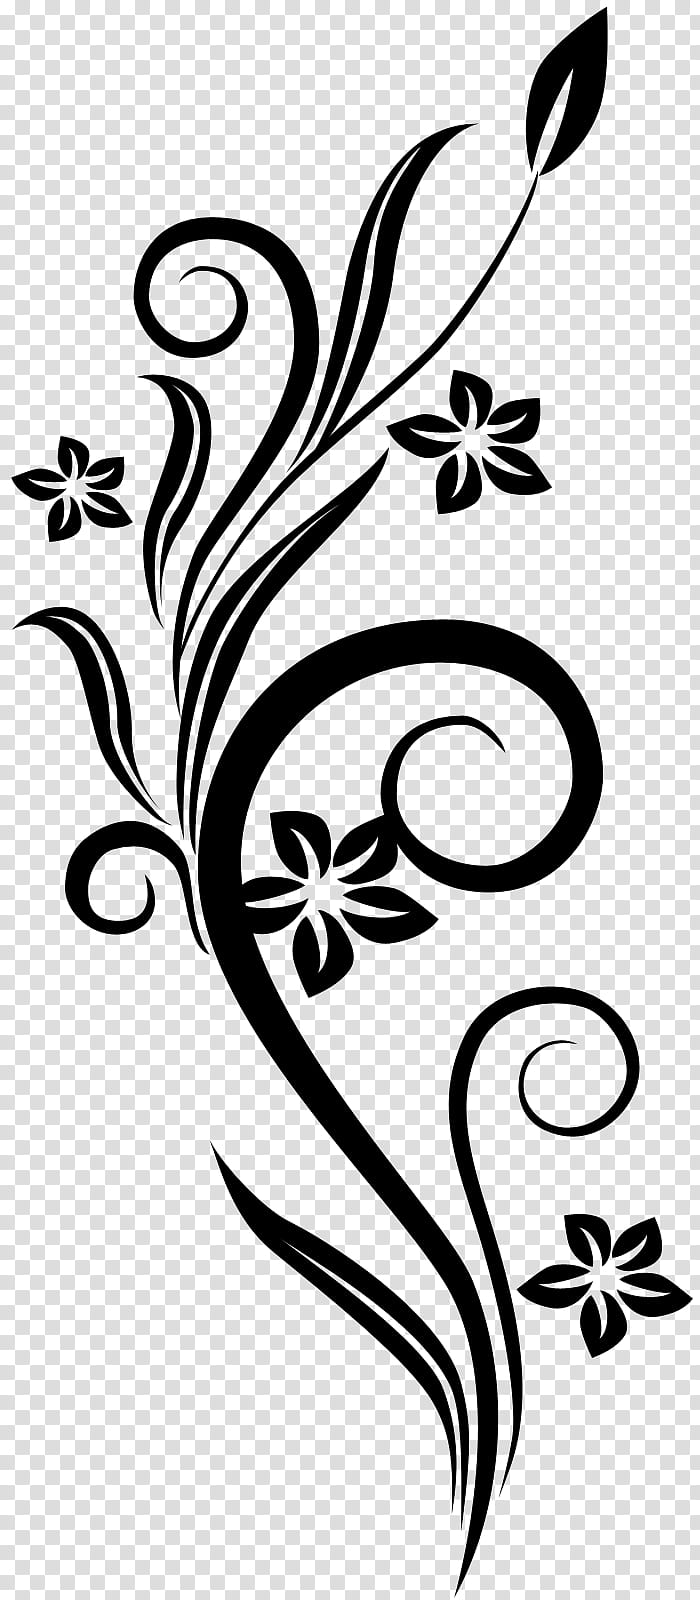 Floral Line Art Sakura Flower Outline Illustration Set Hand Painted Doodle  Flowers Perfect For Wedding Invitations Bridal Shower And Floral Greeting  Cards Black And White Stencil Flowers Isolated Stock Illustration - Download